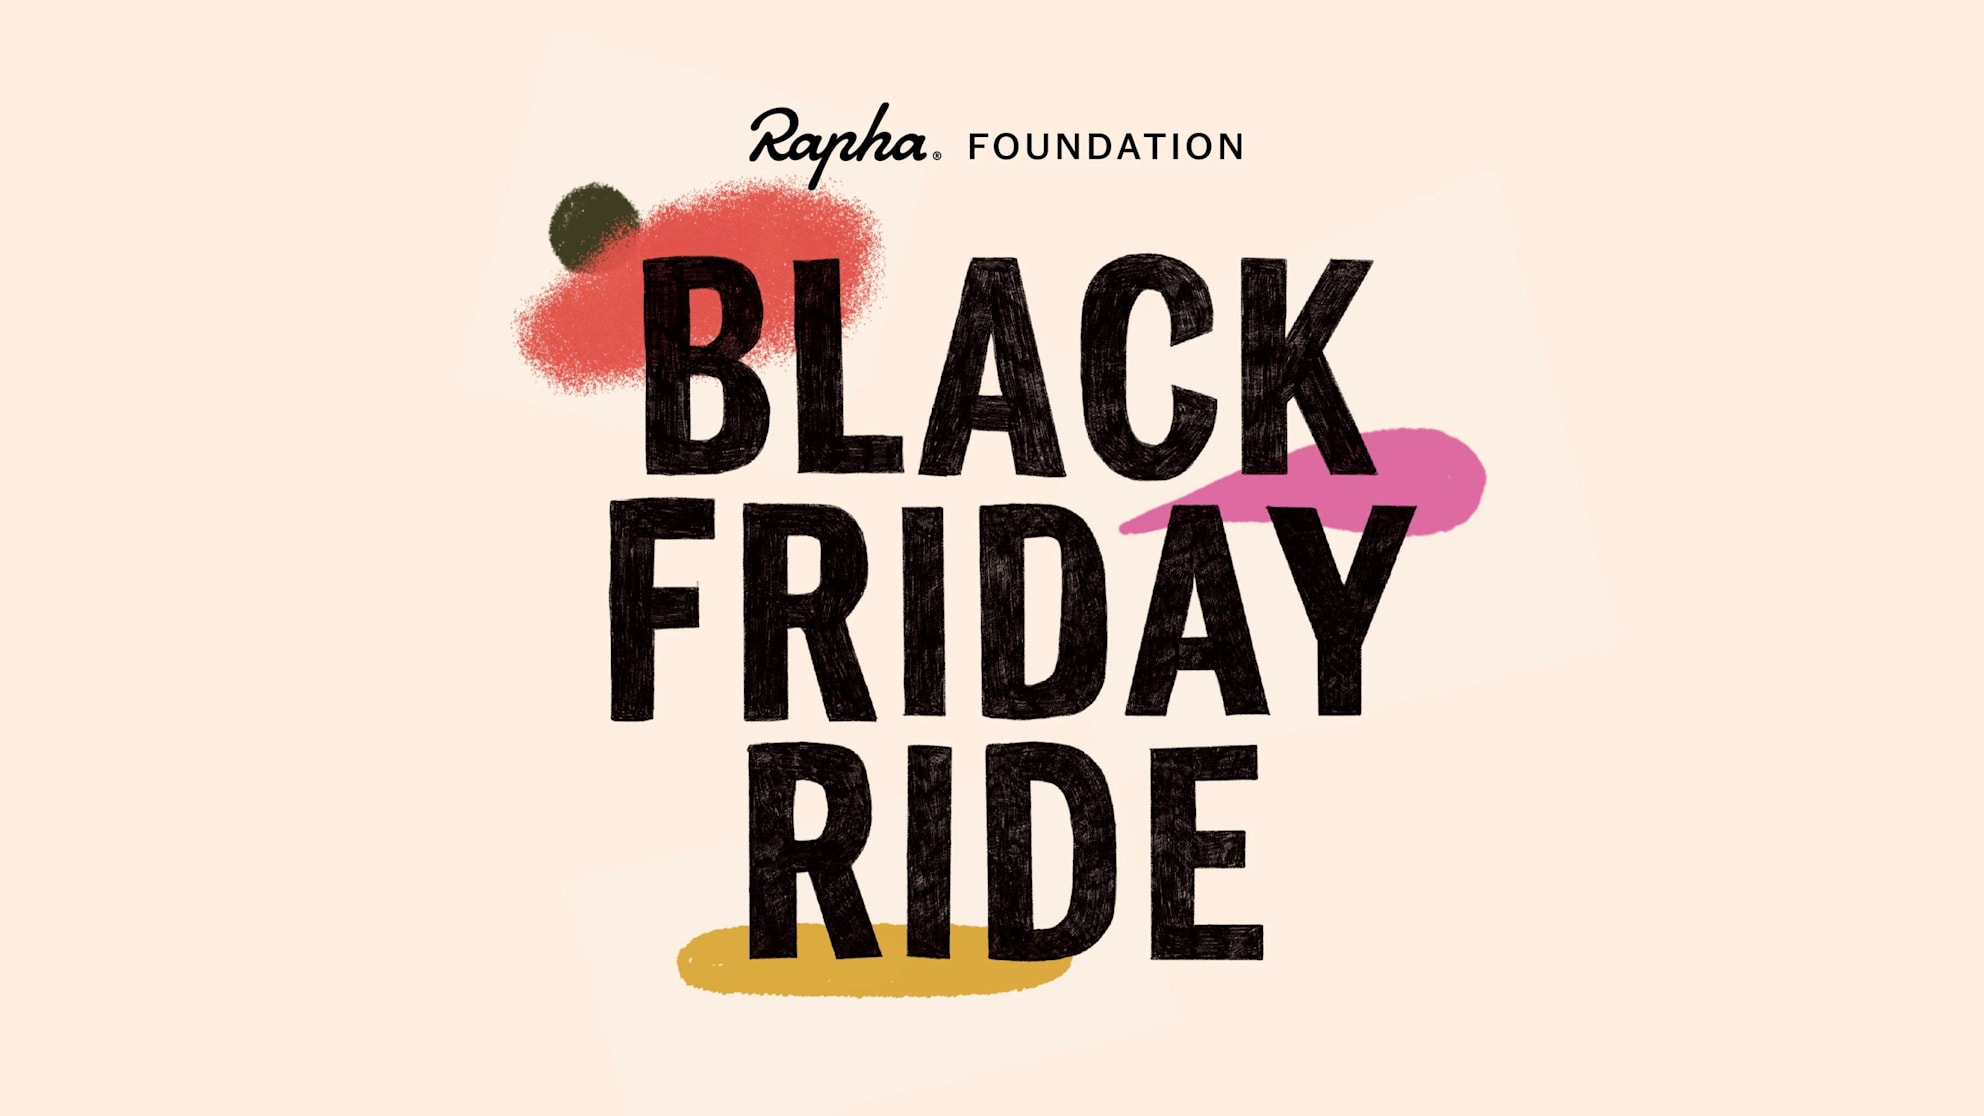 Rapha Black Friday Ride - Cycling Charity Event 2022